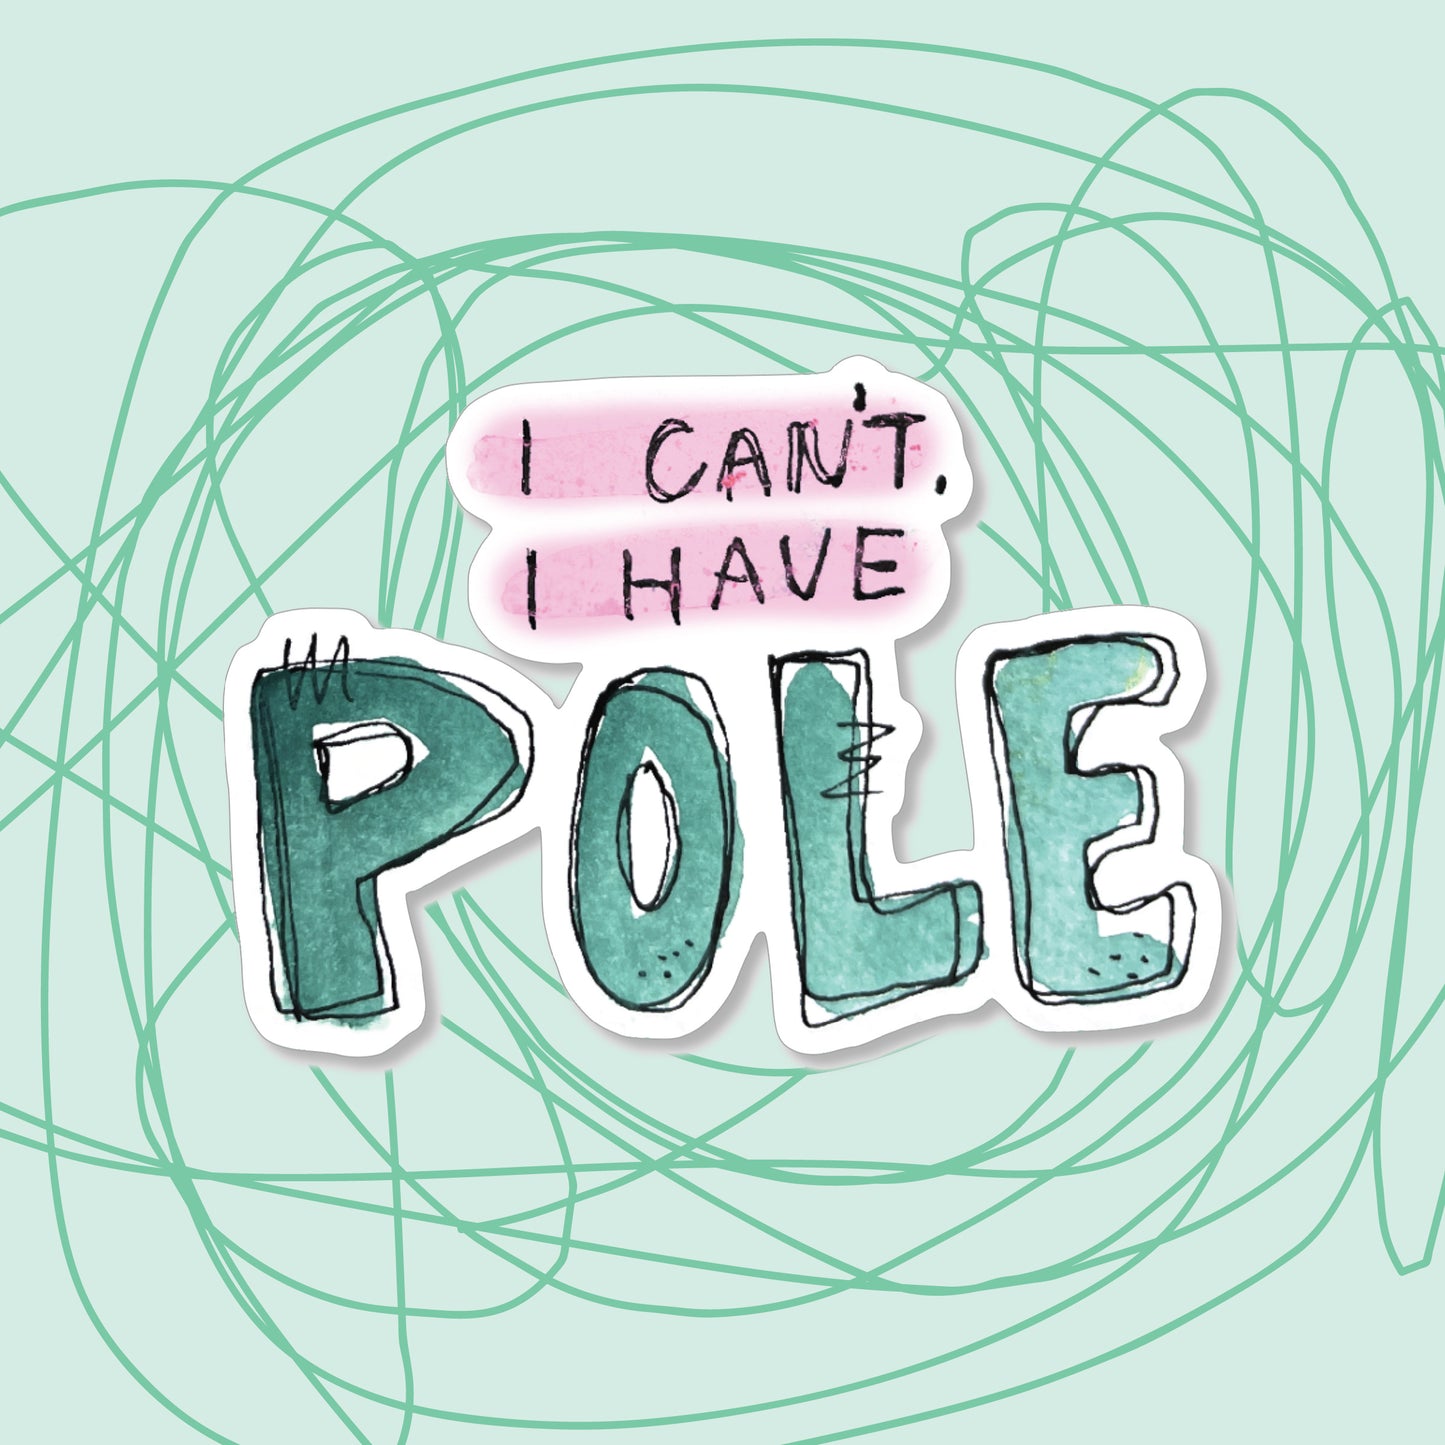 "I can't, I have Pole" Sticker